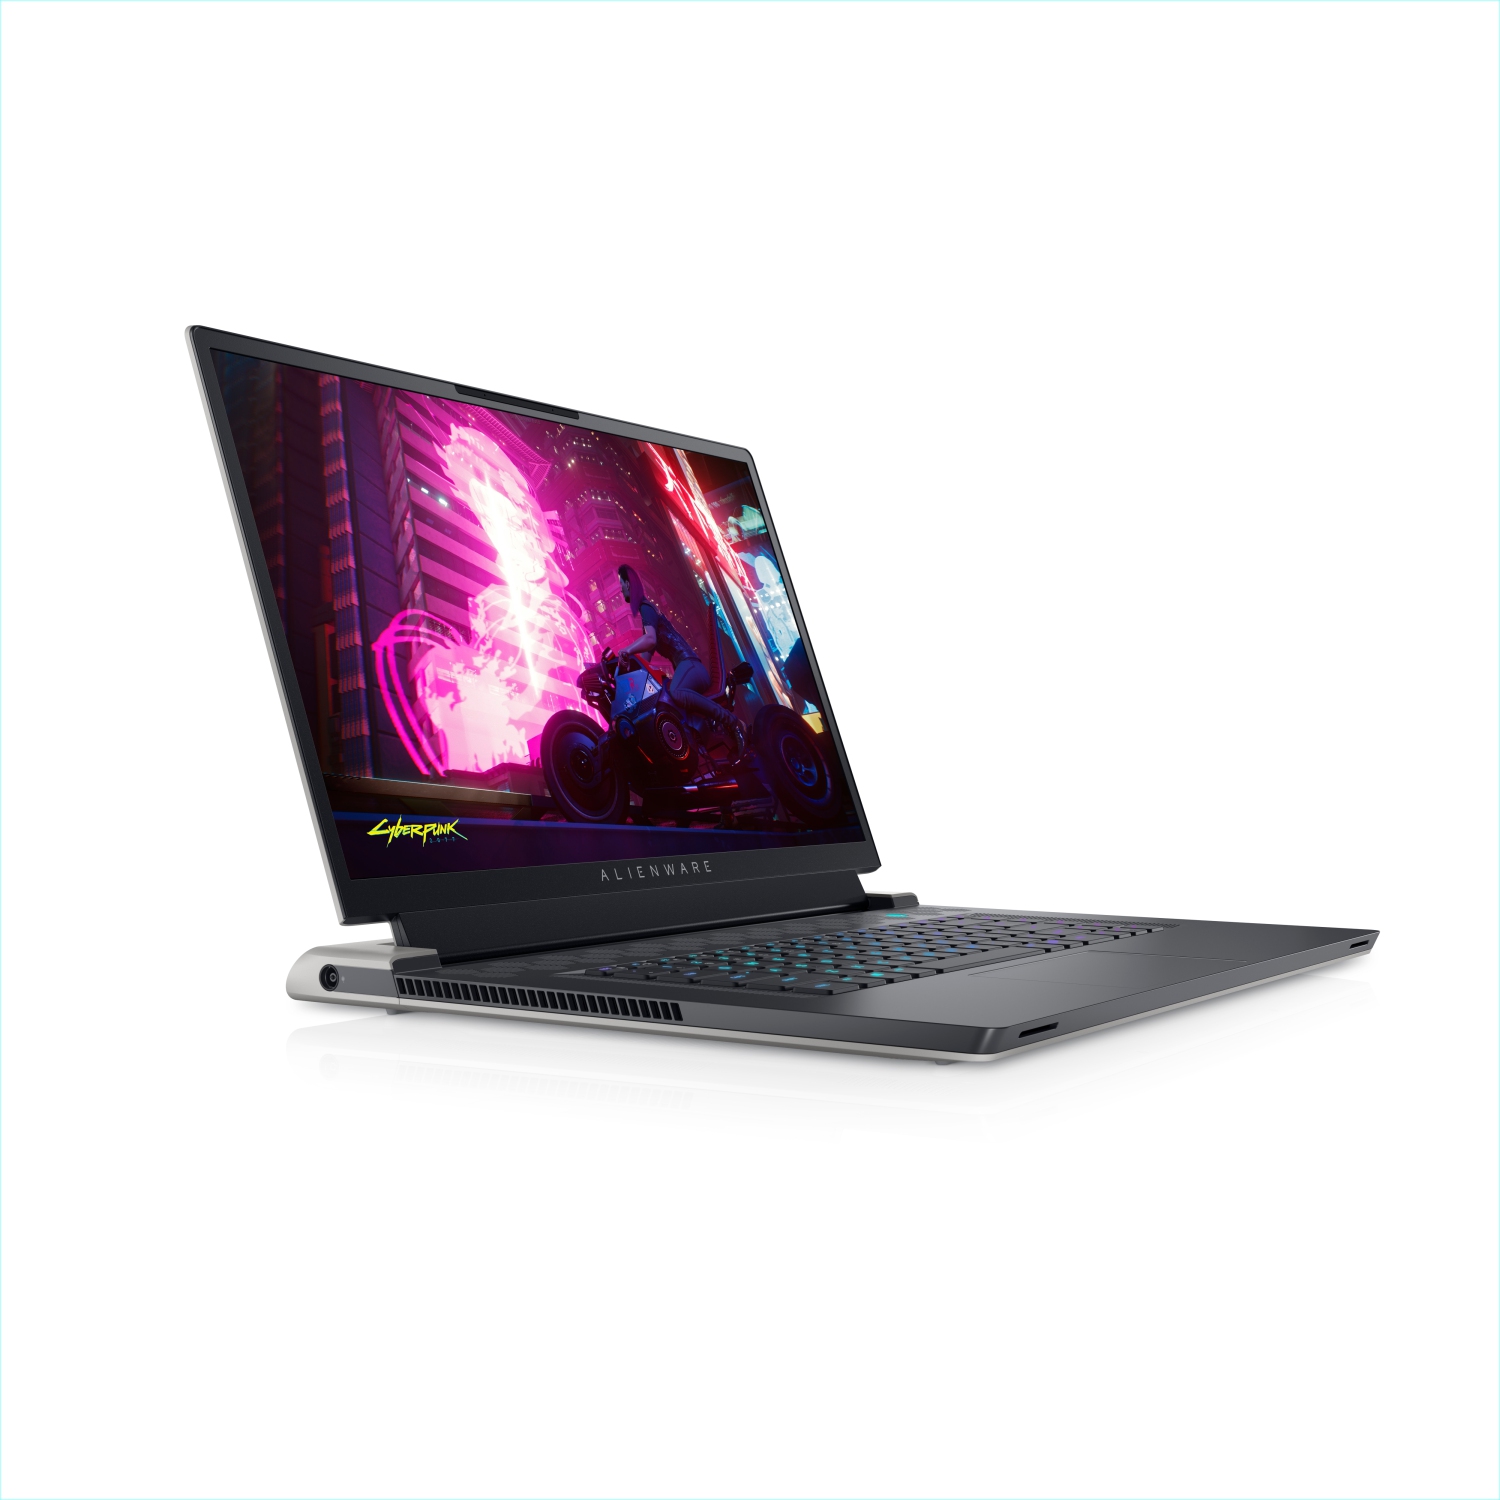 Refurbished (Excellent) - Dell Alienware X17 R1 Gaming Laptop (2021), 17.3" FHD, Core i7, 2TB SSD, 64GB RAM, RTX 3070, 8 Cores @ 4.6 GHz, 11th Gen CPU Certified